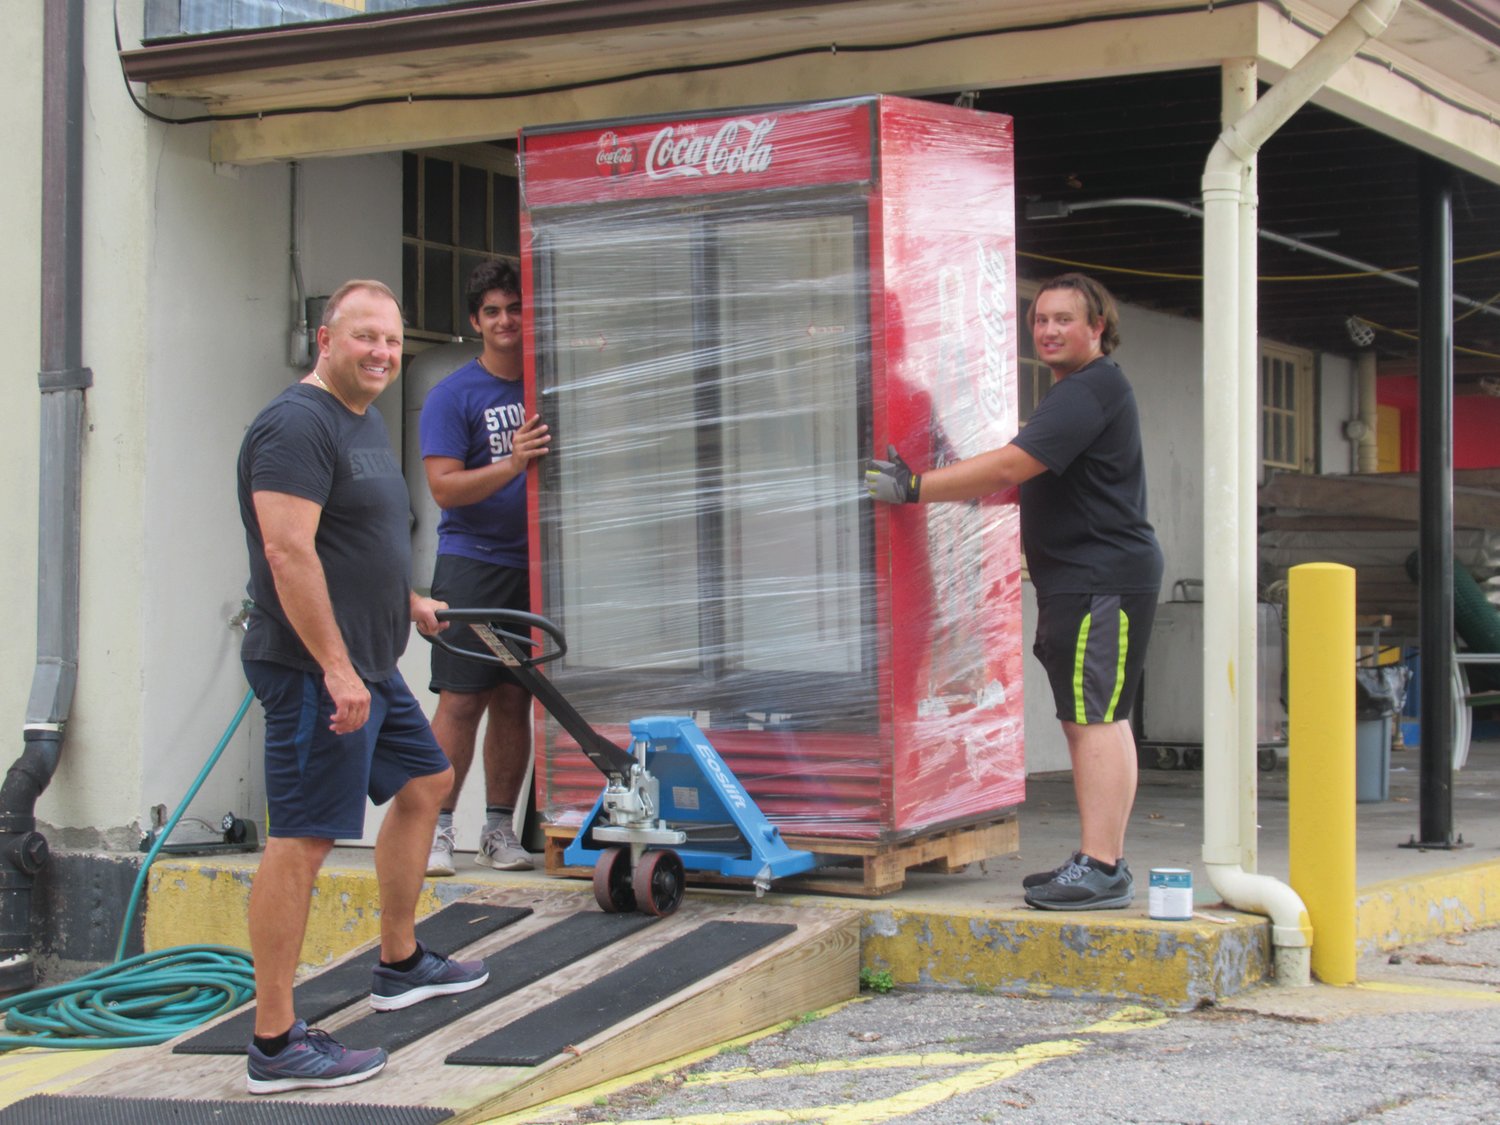 DAN’S DUTY: Dan Parrillo (center) and his son Mitchell (right) and Julius DiSanto are taking a huge cooler out of storage that will be used for food items during this weekend’s St. Rocco’s Feast and Festival that opens Thursday evening in Johnston.